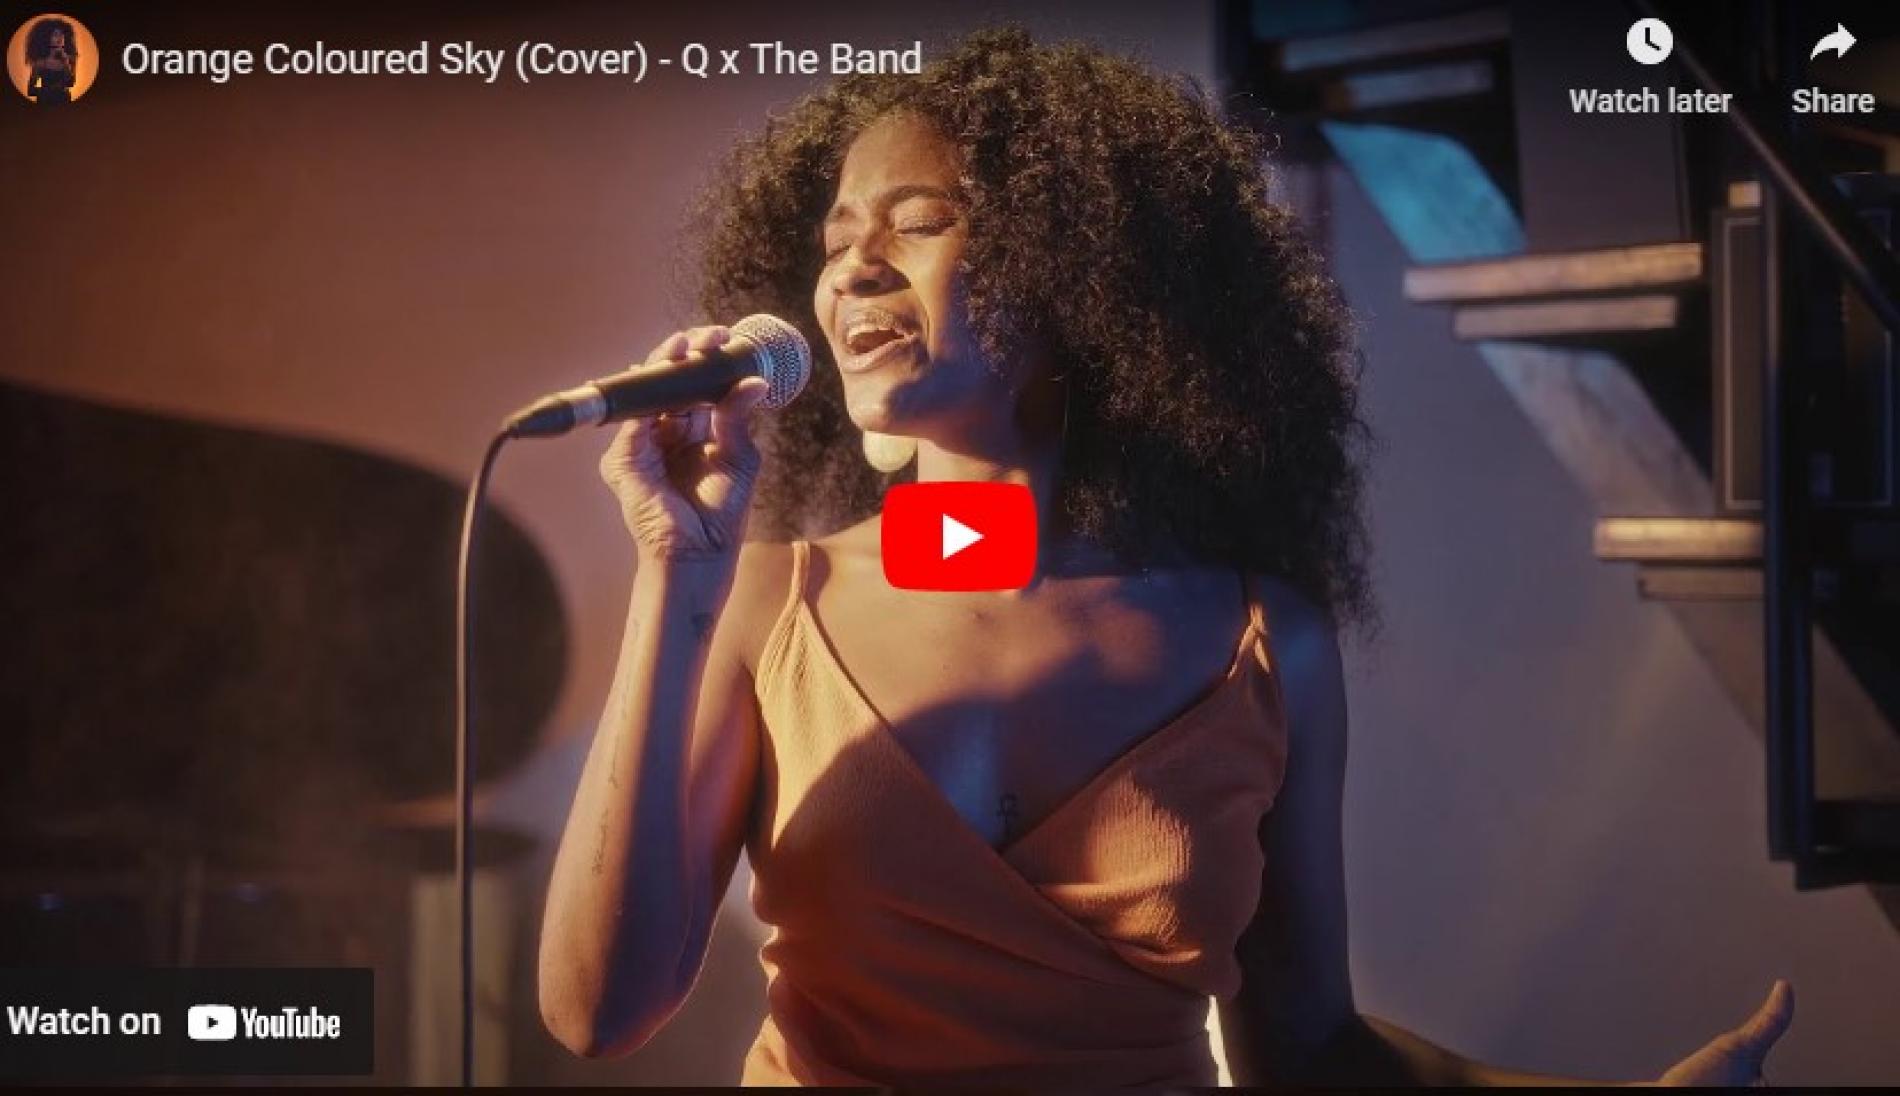 New Music : Orange Coloured Sky (Cover) – Q x The Band